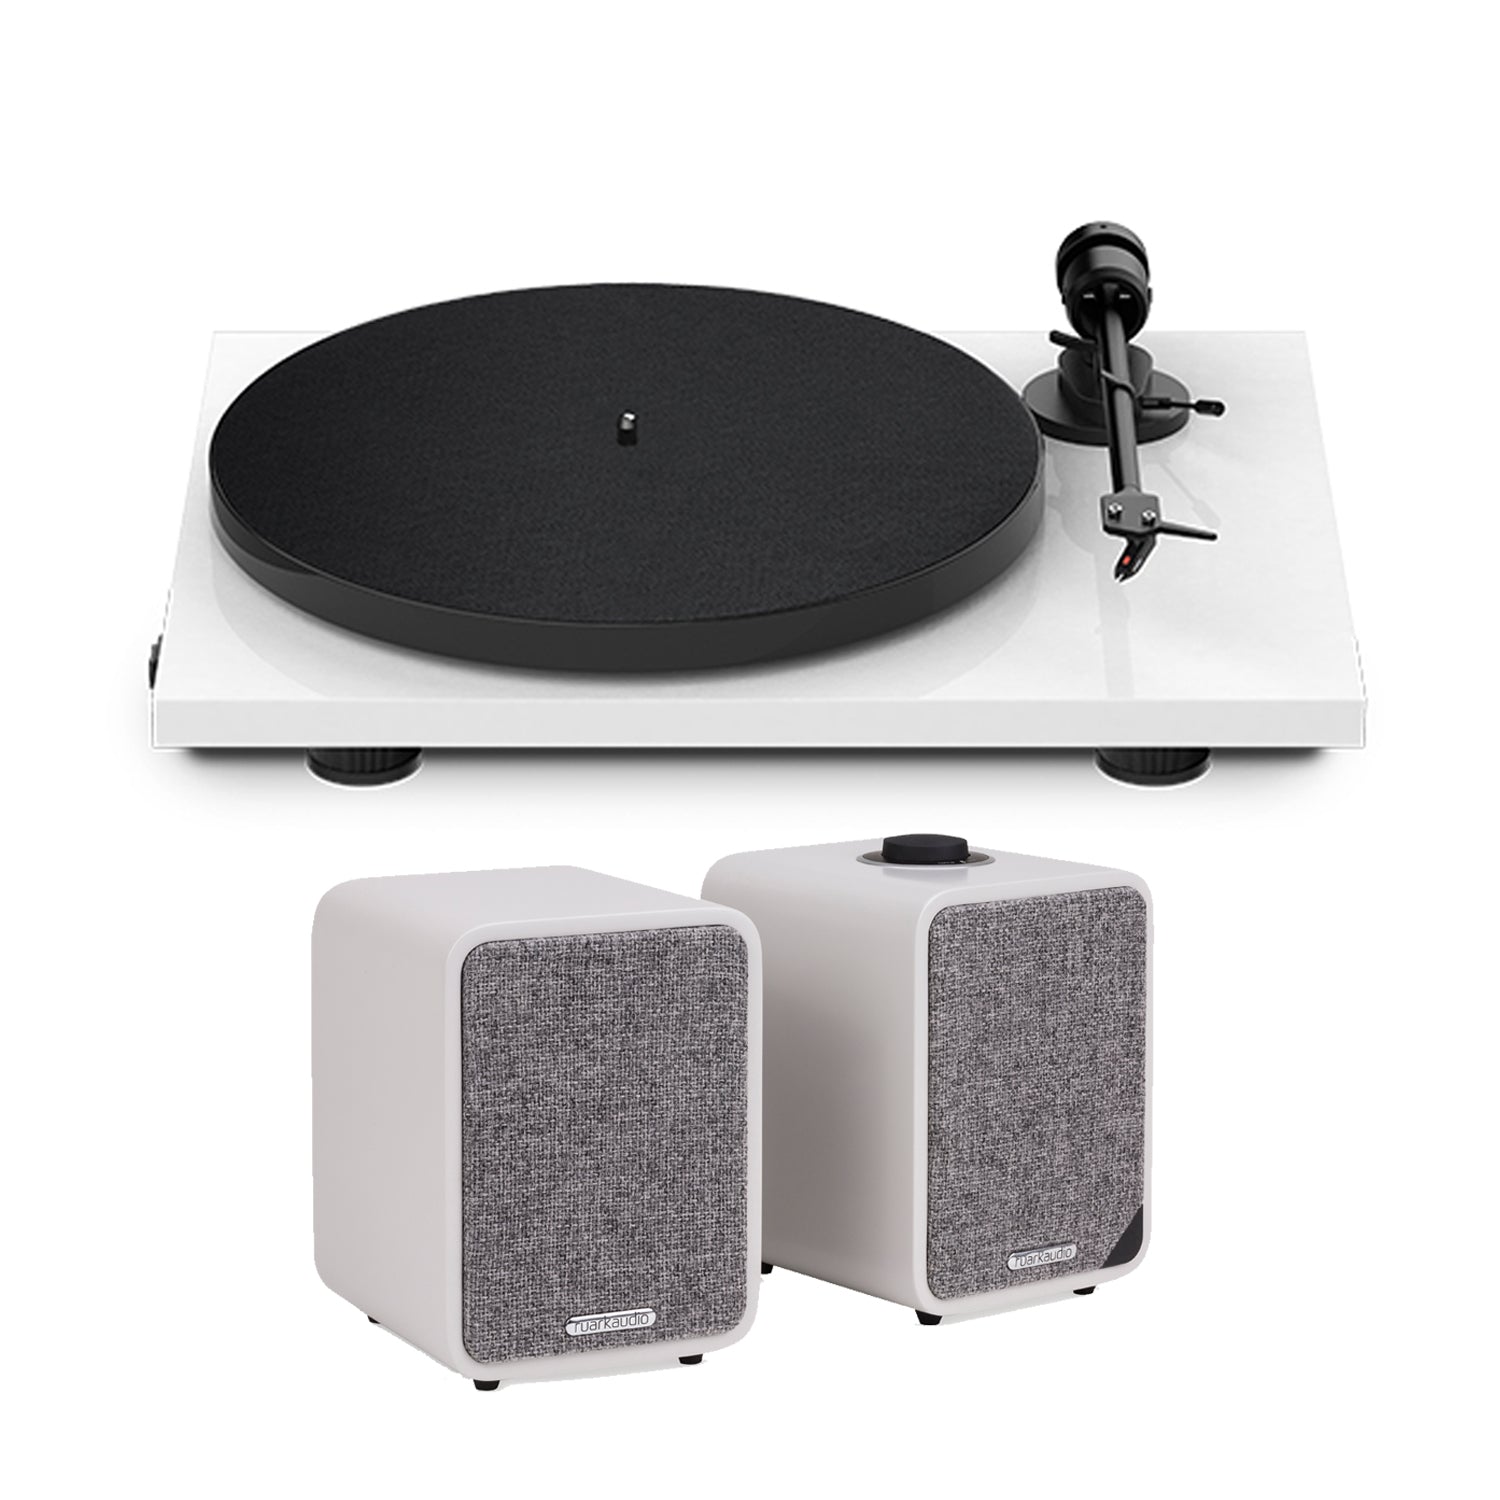 Image of Pro-Ject E1PHONOWH-MR1MK2G E1 Phono Turntable in White with Ruark MR1 MK2 Speakers in Grey Bundle